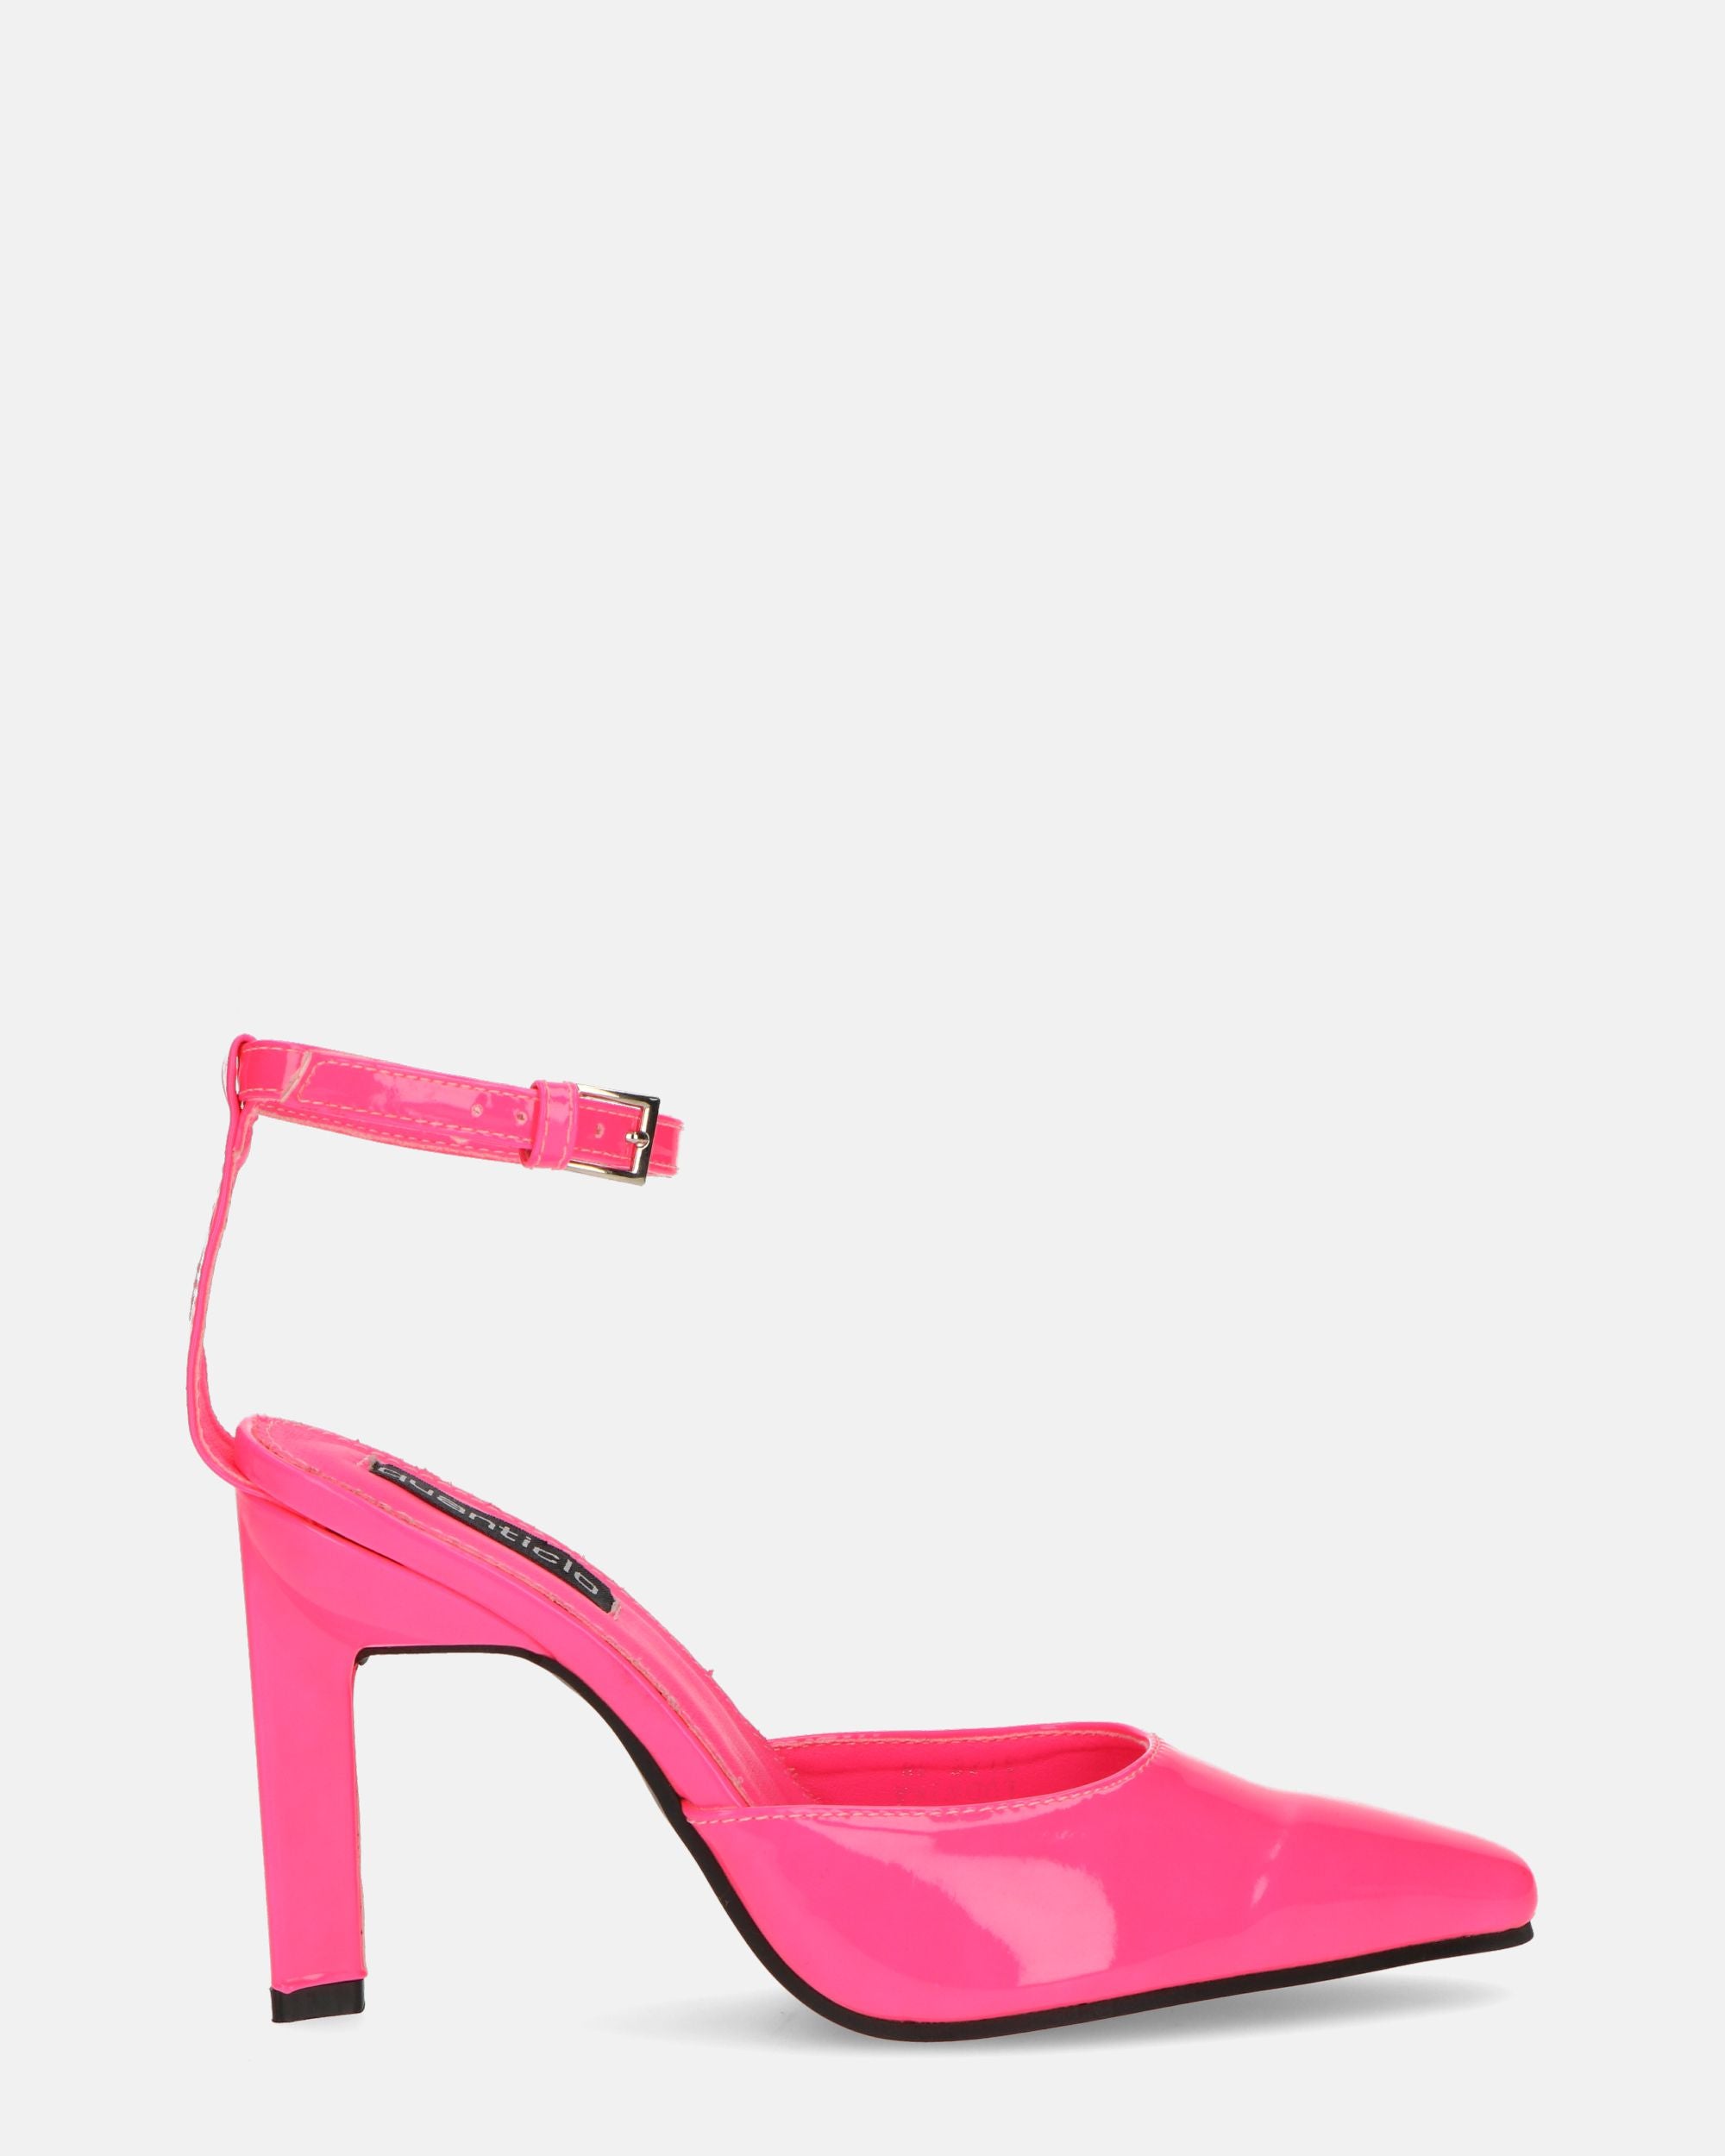 LUDWIKA - shoes with heel and strap in pink glassy